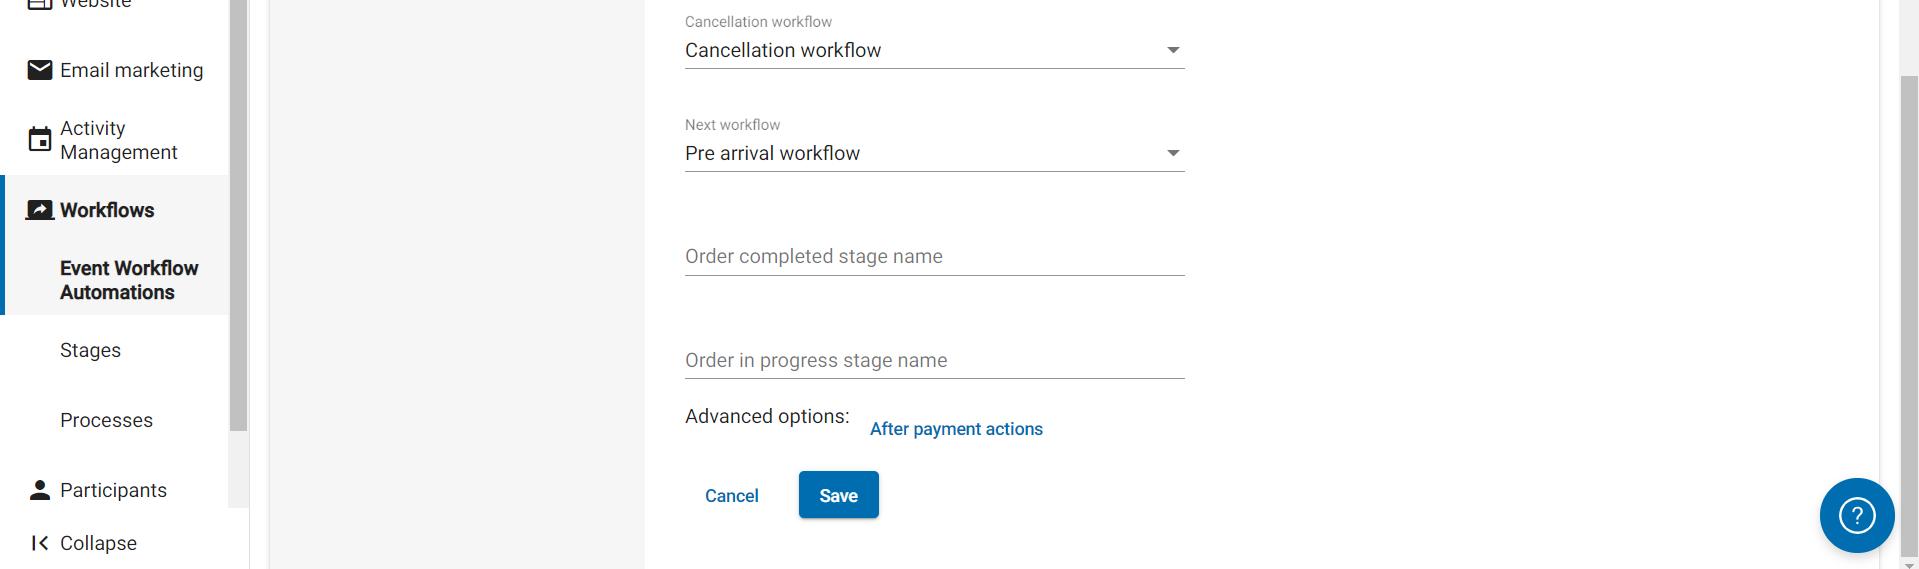 e_payment_registration_workflowww.png